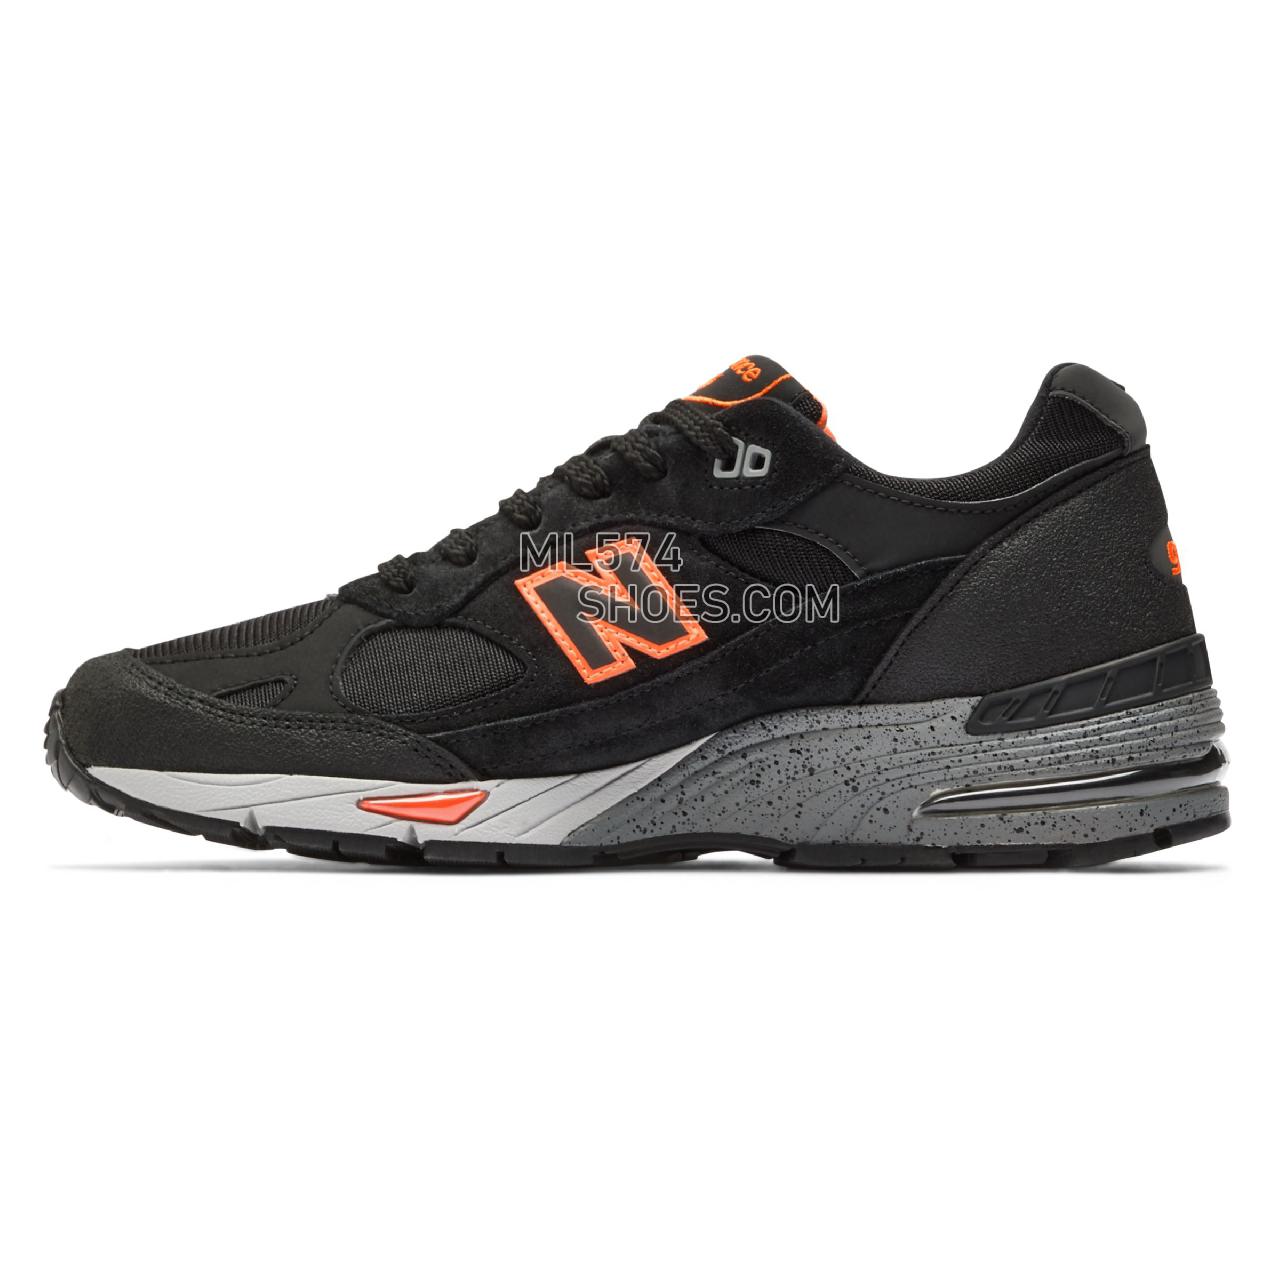 New Balance Made in UK 991 - Men's Made in USA And UK Sneakers - Black with Neon Orange - M991NEO